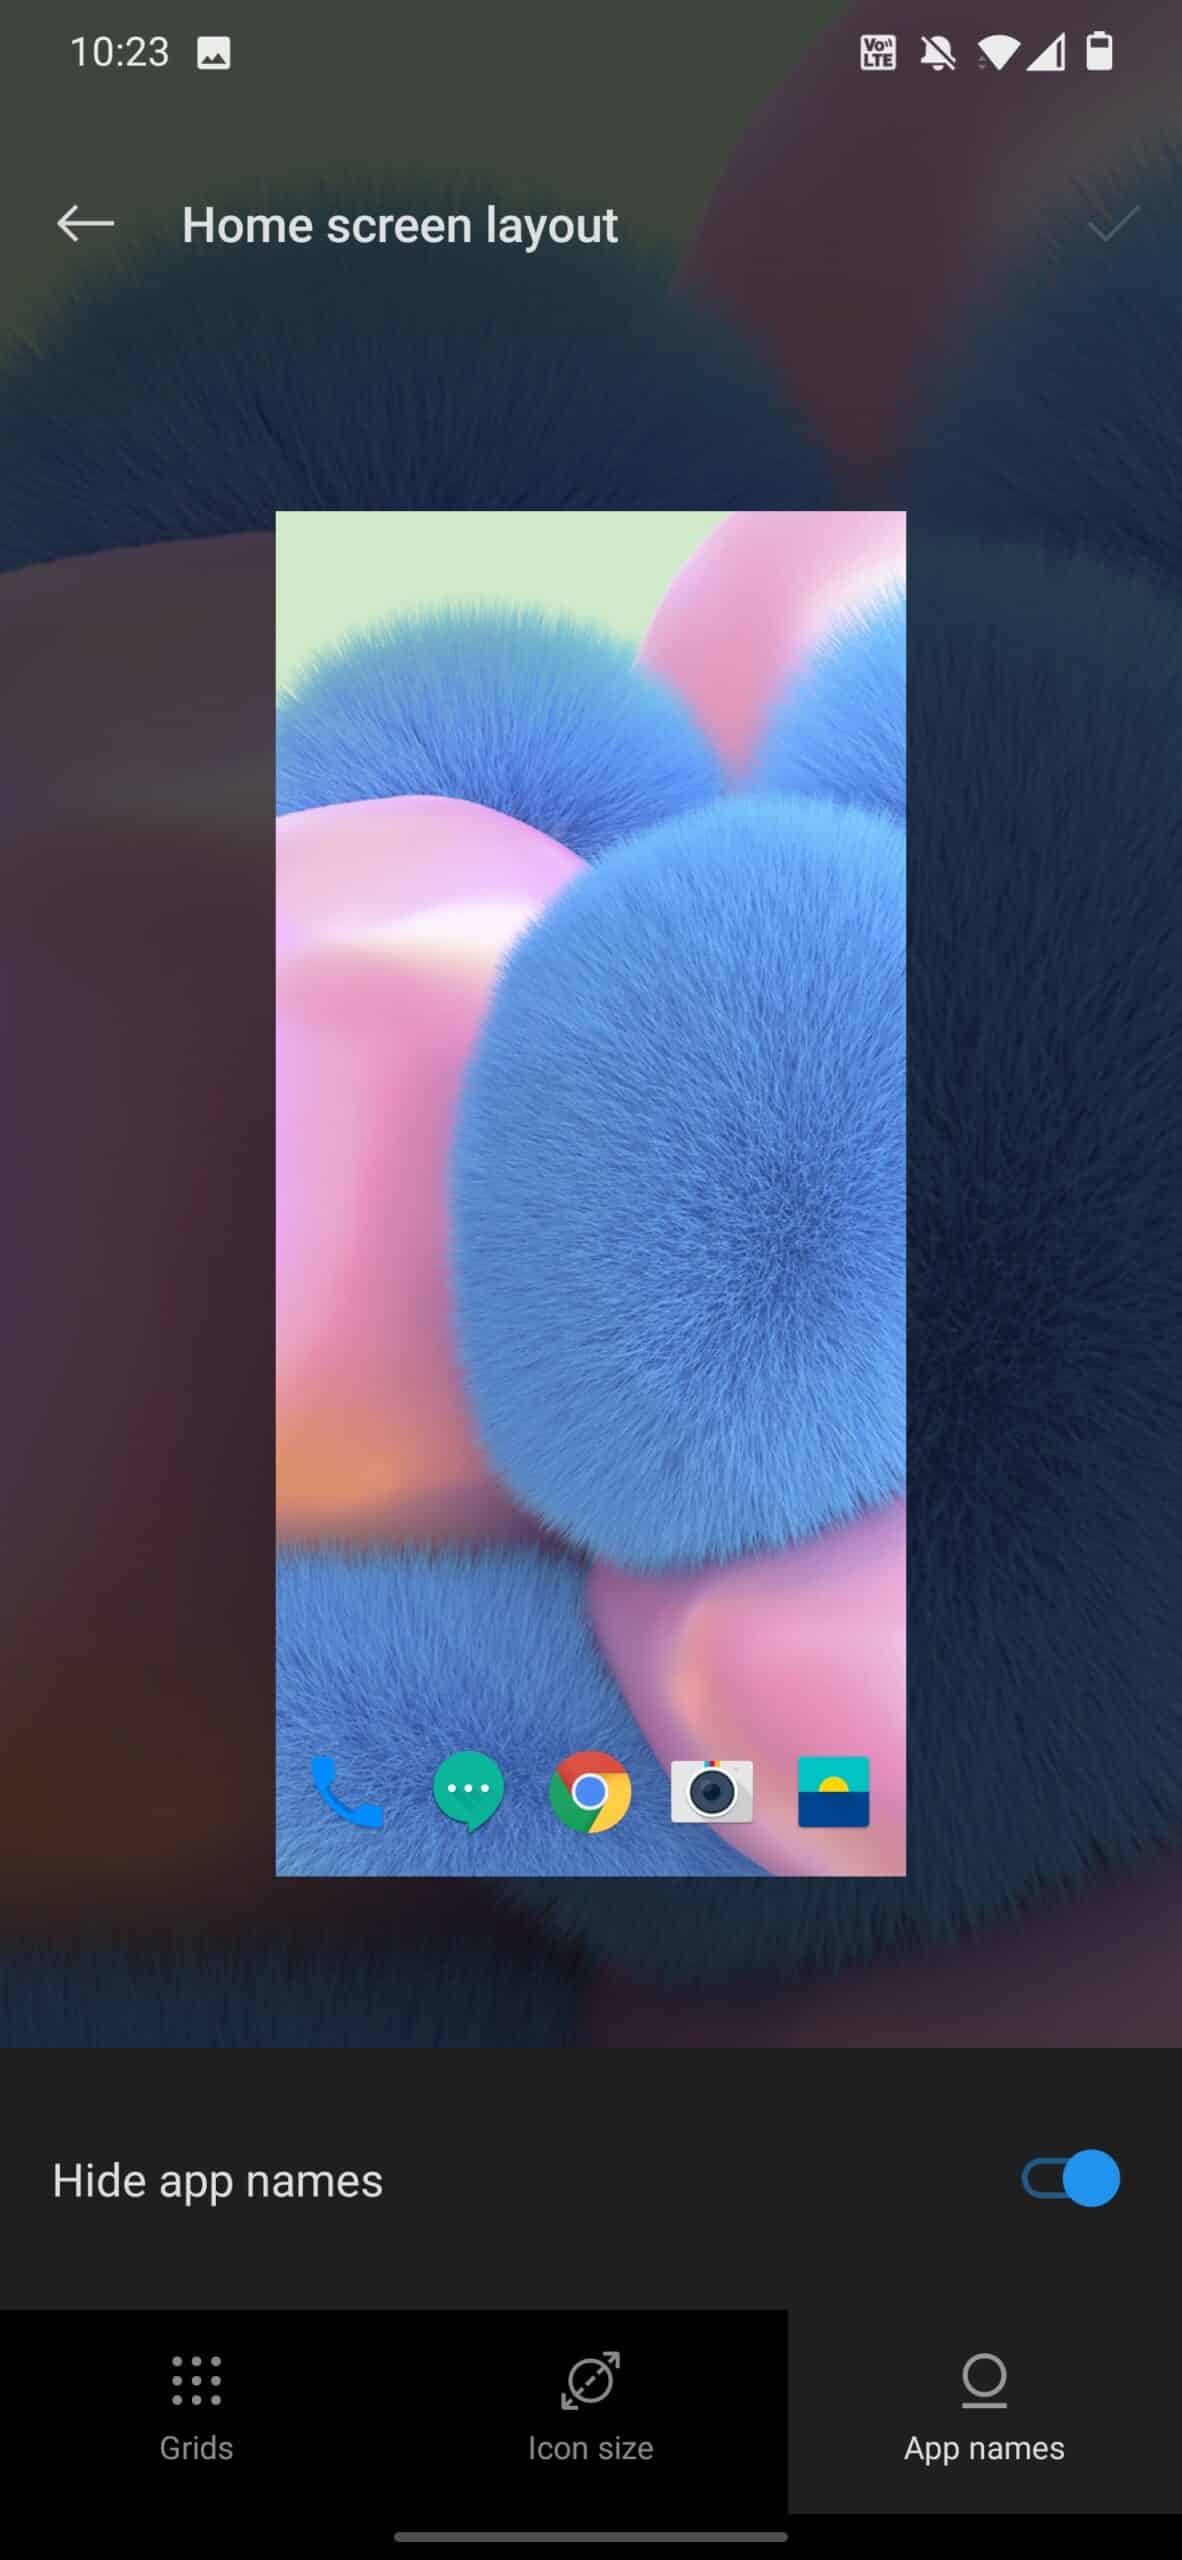 OnePlus Launcher 4.6.4 adds more customization to the home screen grid